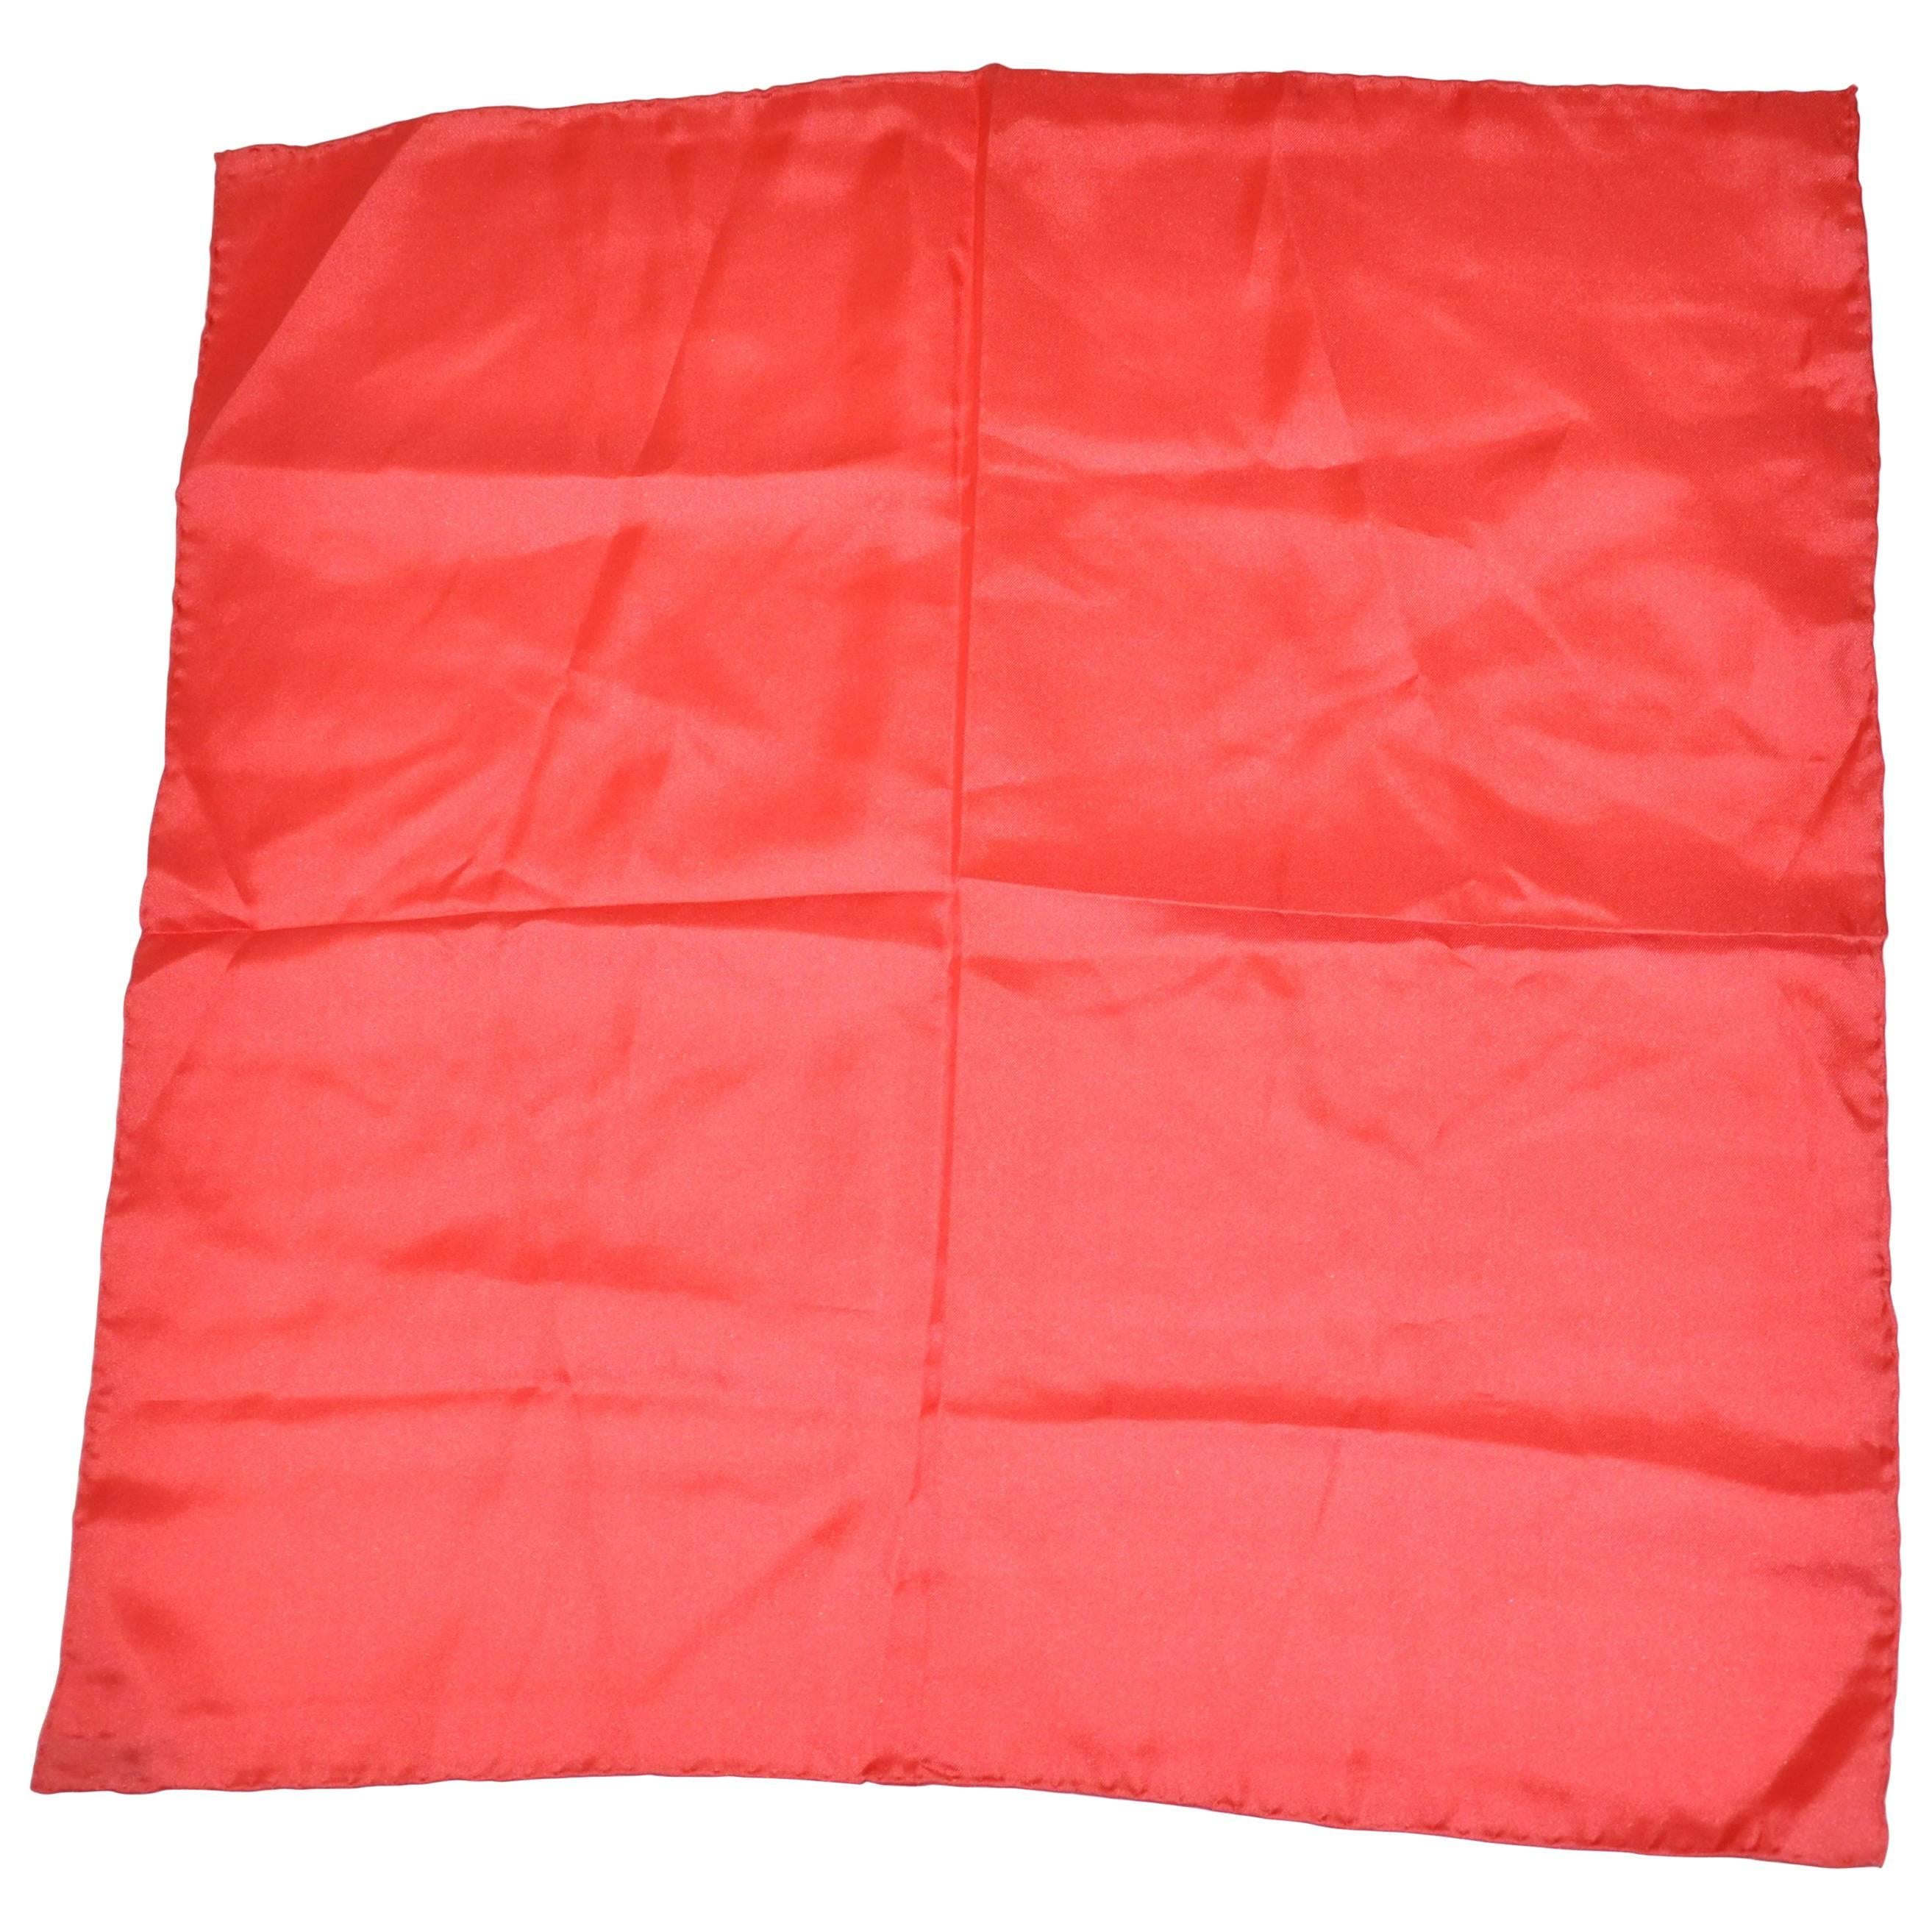 Italy Red Silk Handkerchief with Hand-Rolled Edges For Sale